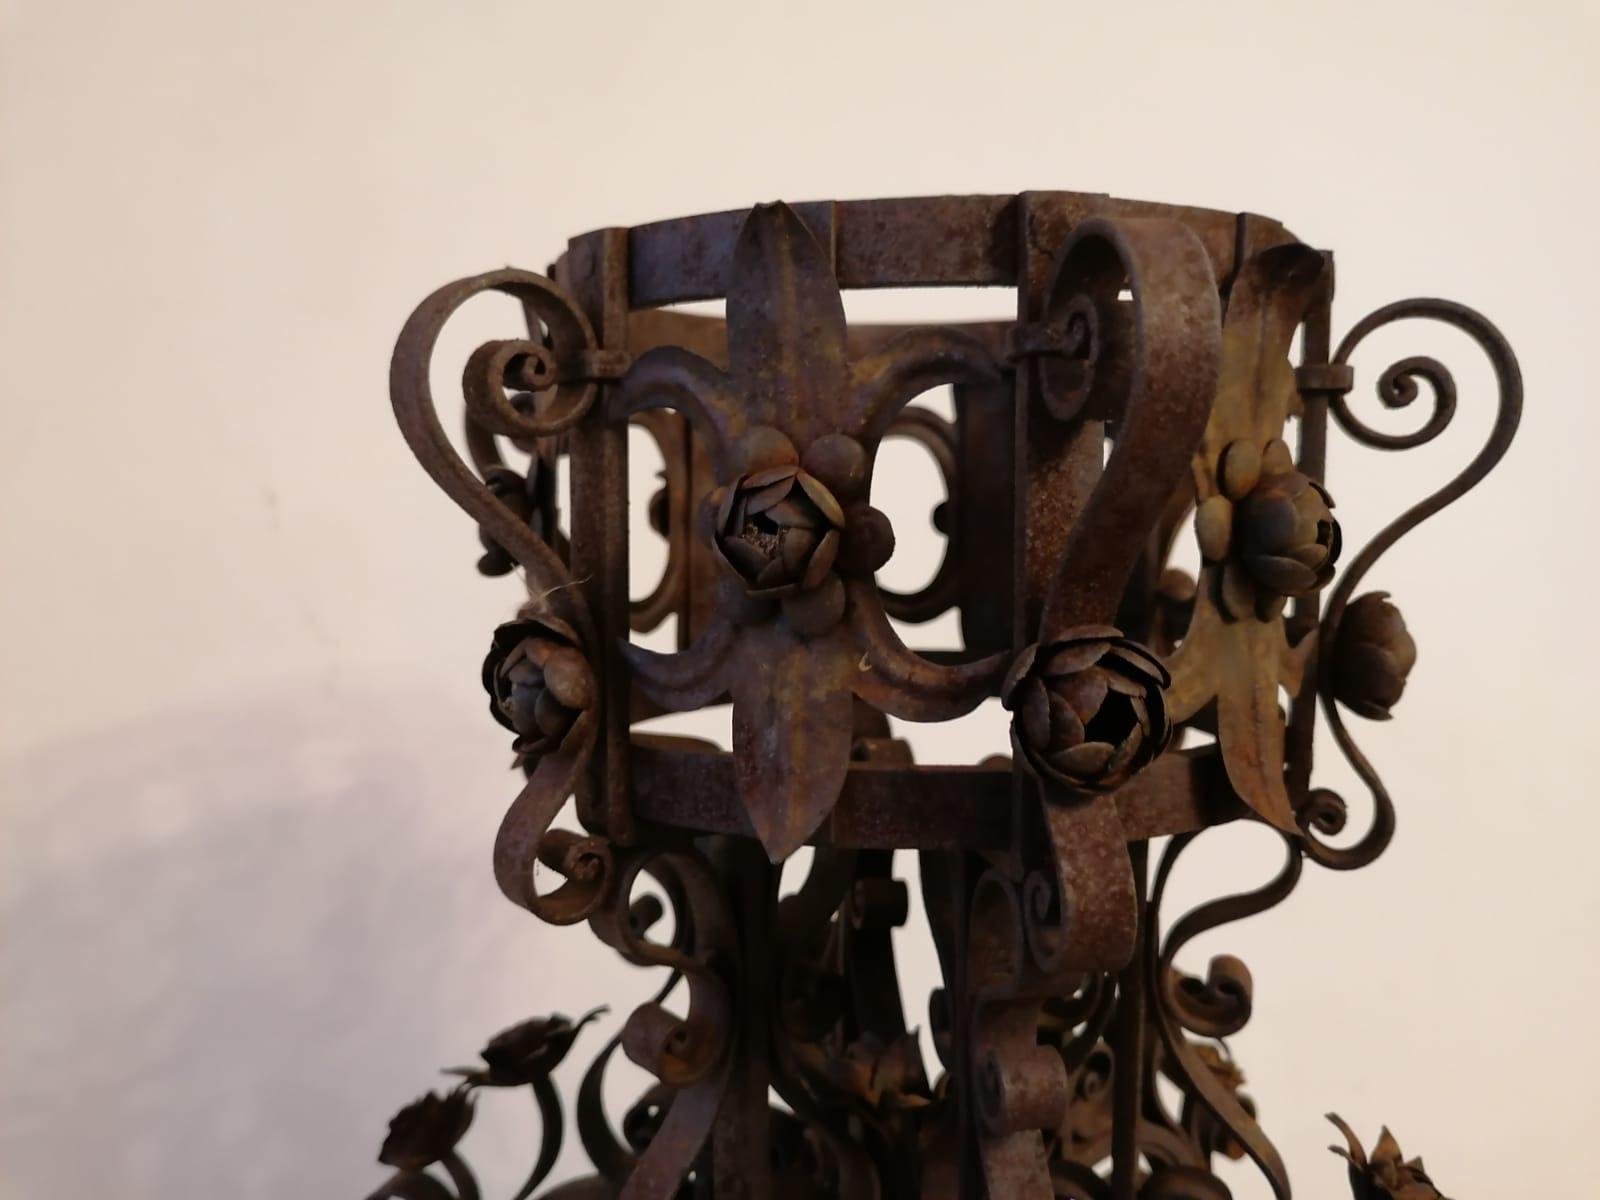 Beautiful Art Nouveau stand in rusted forged iron. Spectacular workmanship of great artisan quality. Fully decorated with flowers, curls and swirls made of forged iron. Iron has a beautiful particular antique patina.